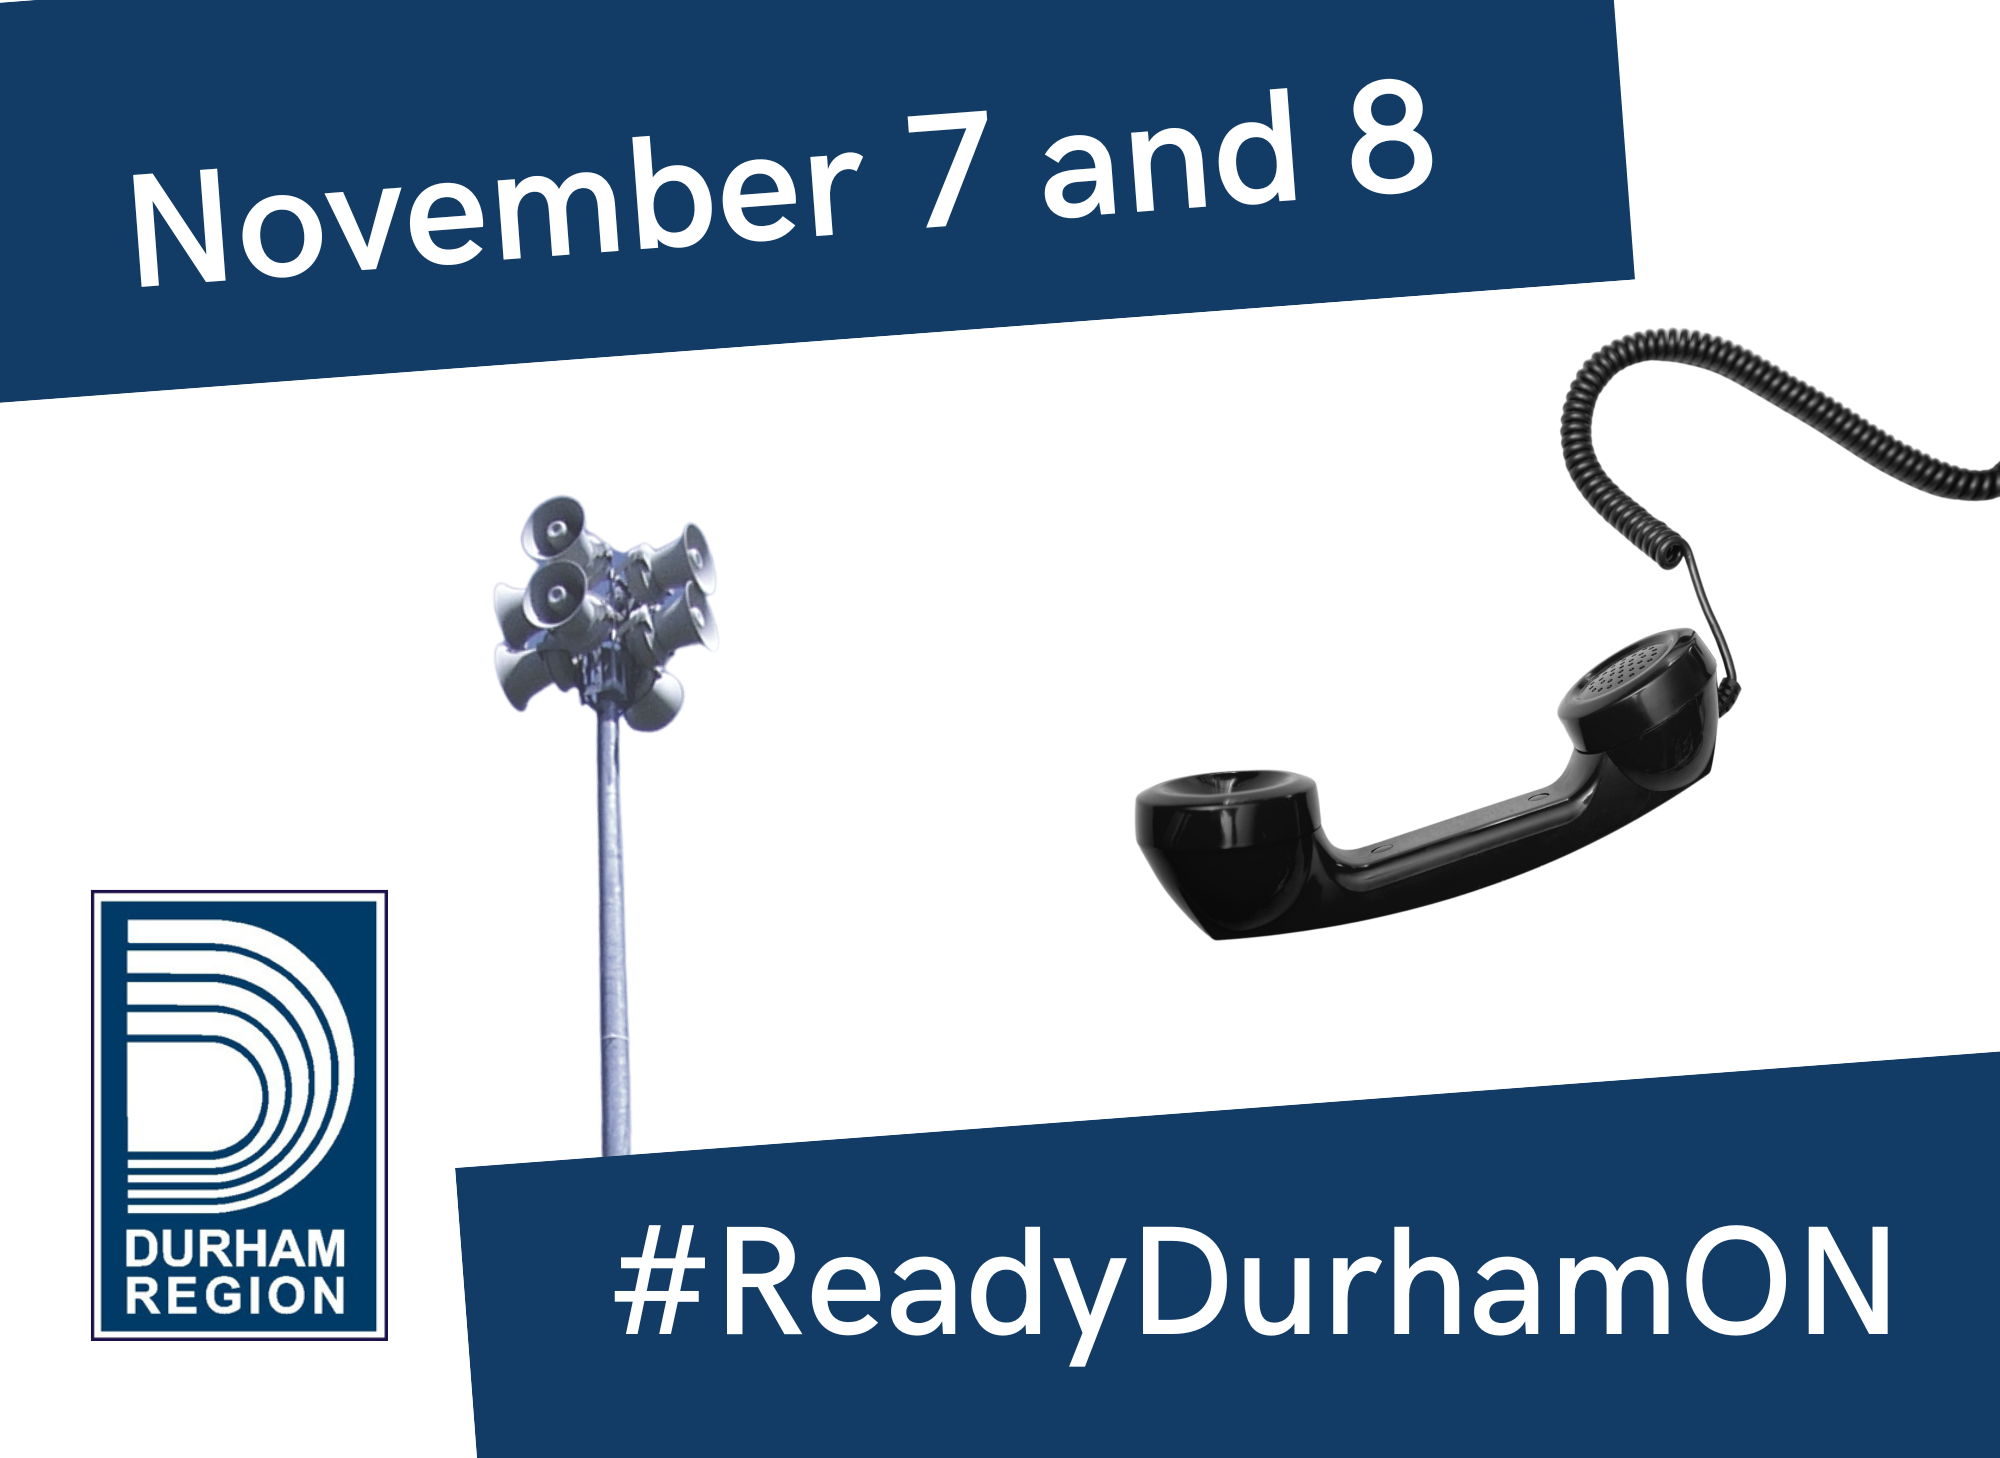 A siren and a phone on a white and blue background. Text that reads November 7 and 8, as well as text that reads #ReadyDurhamON